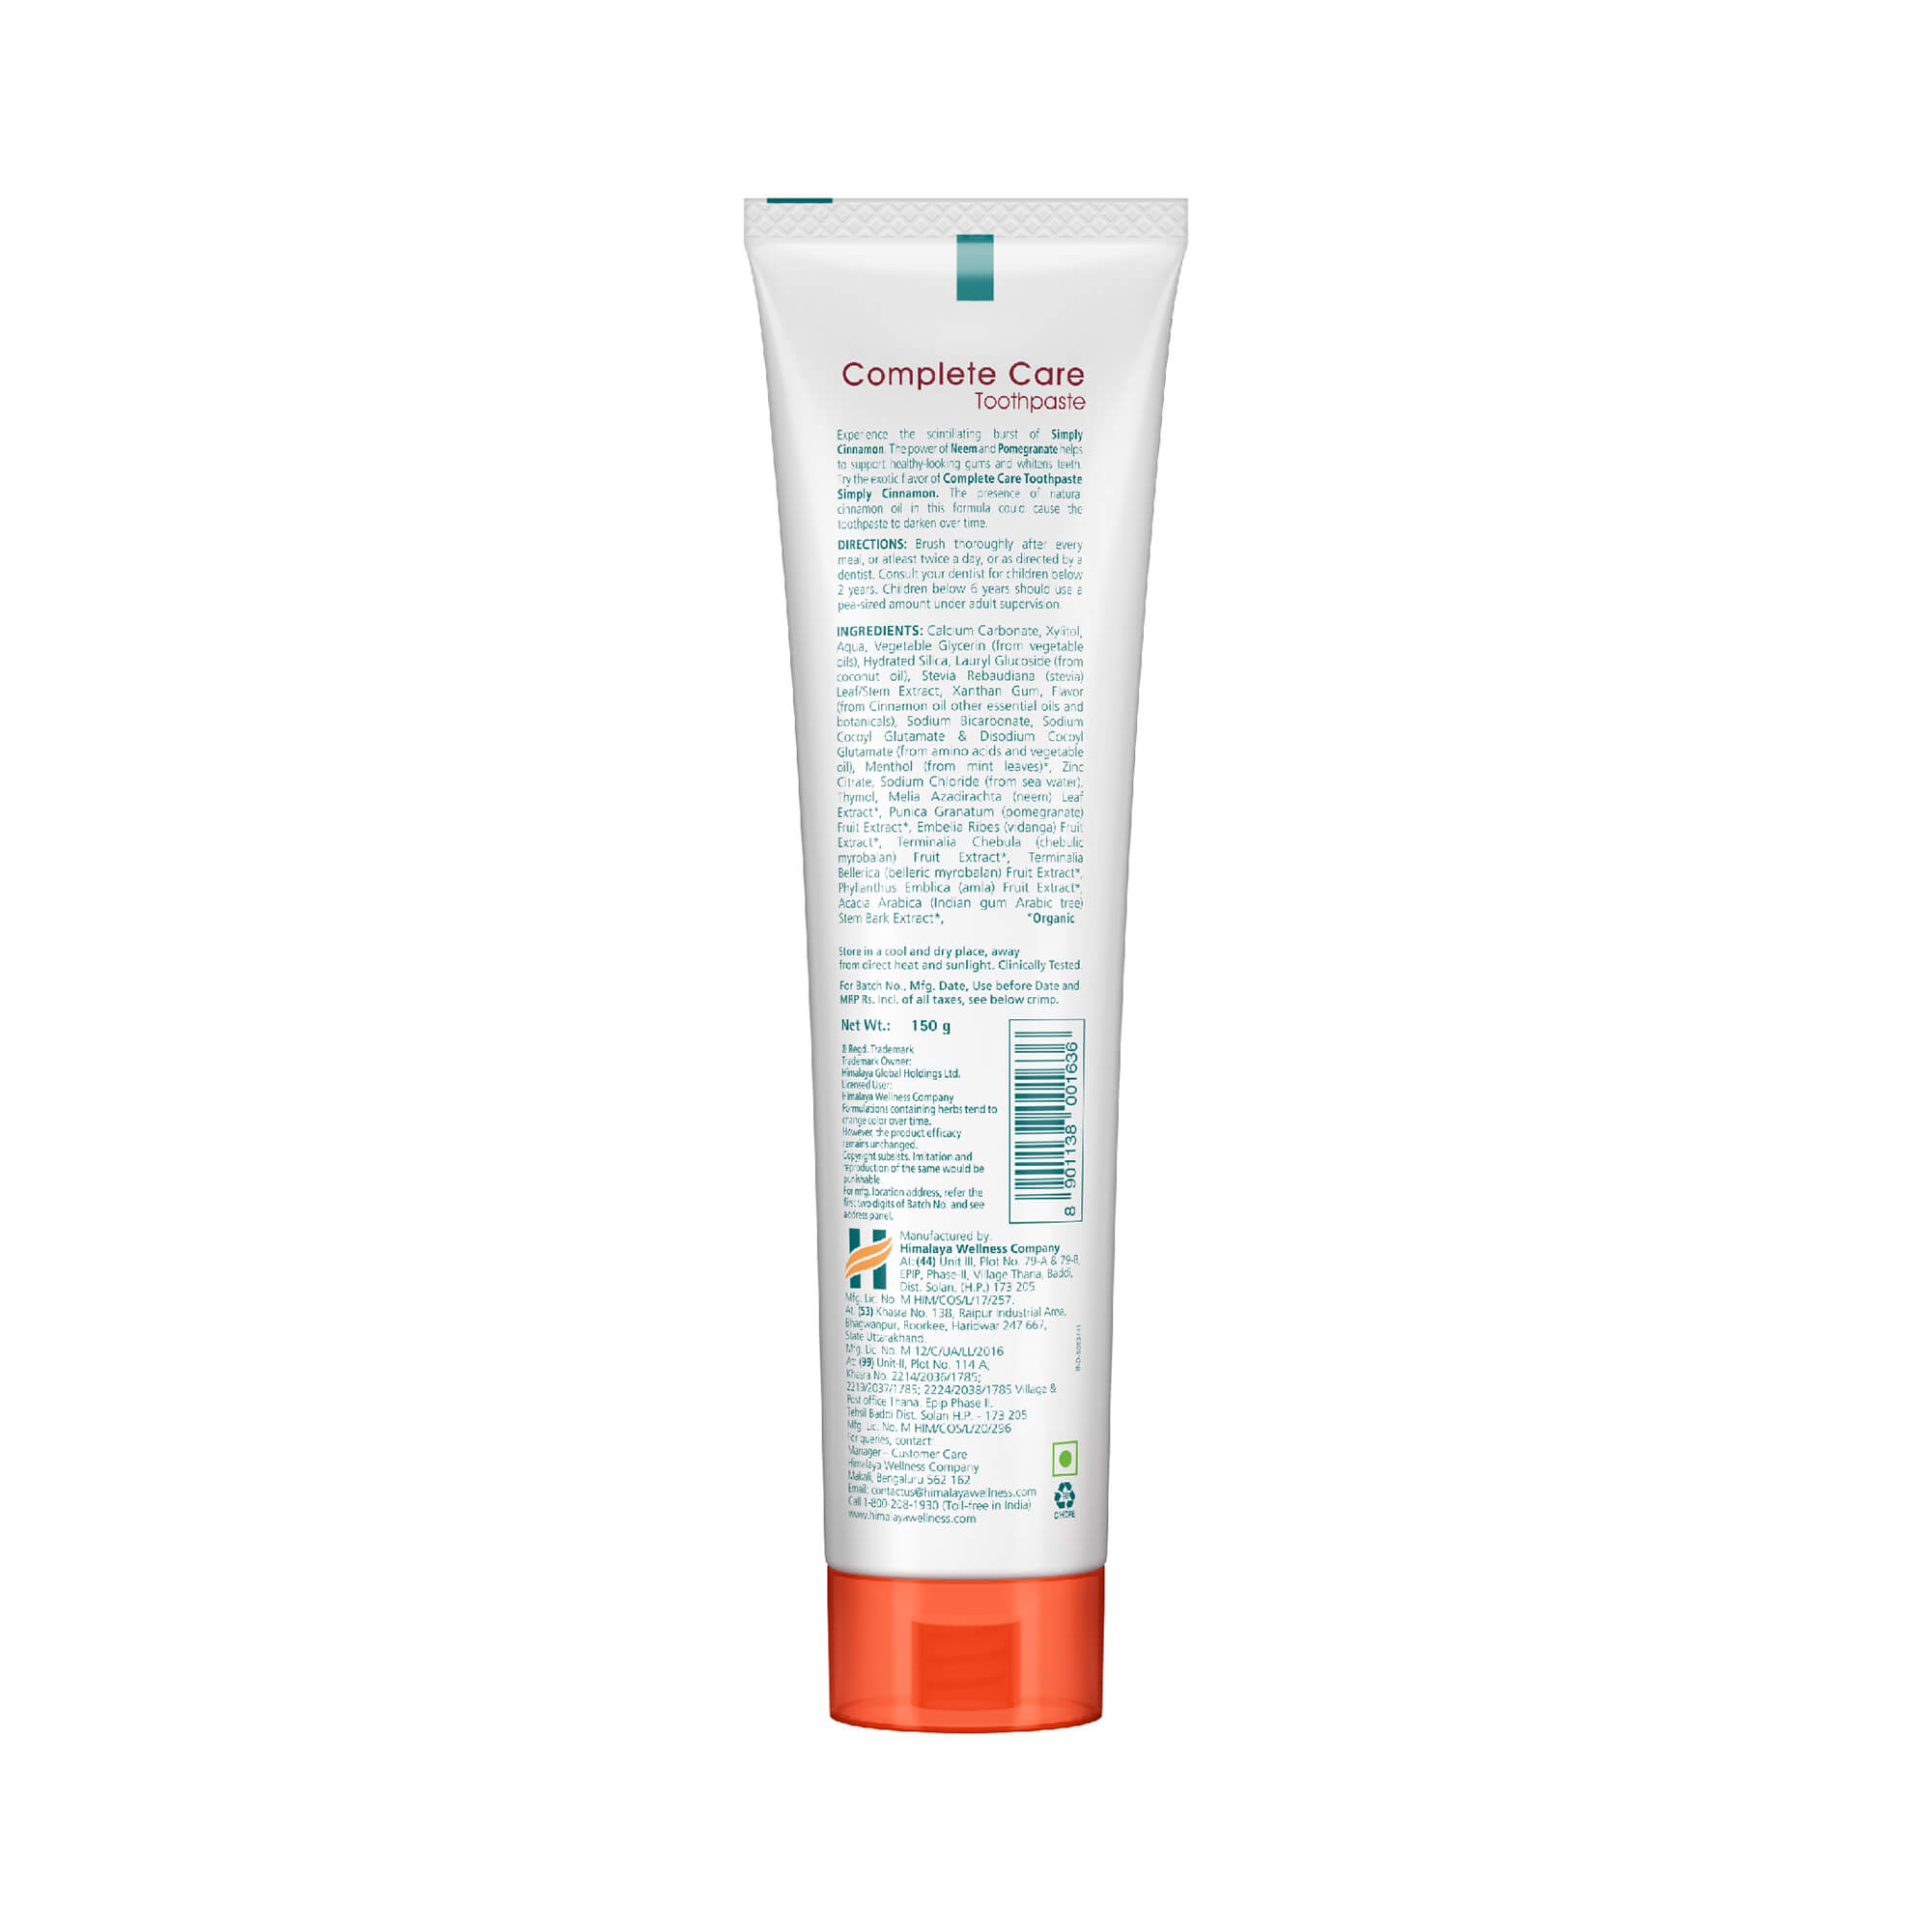  Himalaya BOTANIQUE Complete Care Toothpaste (Simply Cinnamon) Ingredients